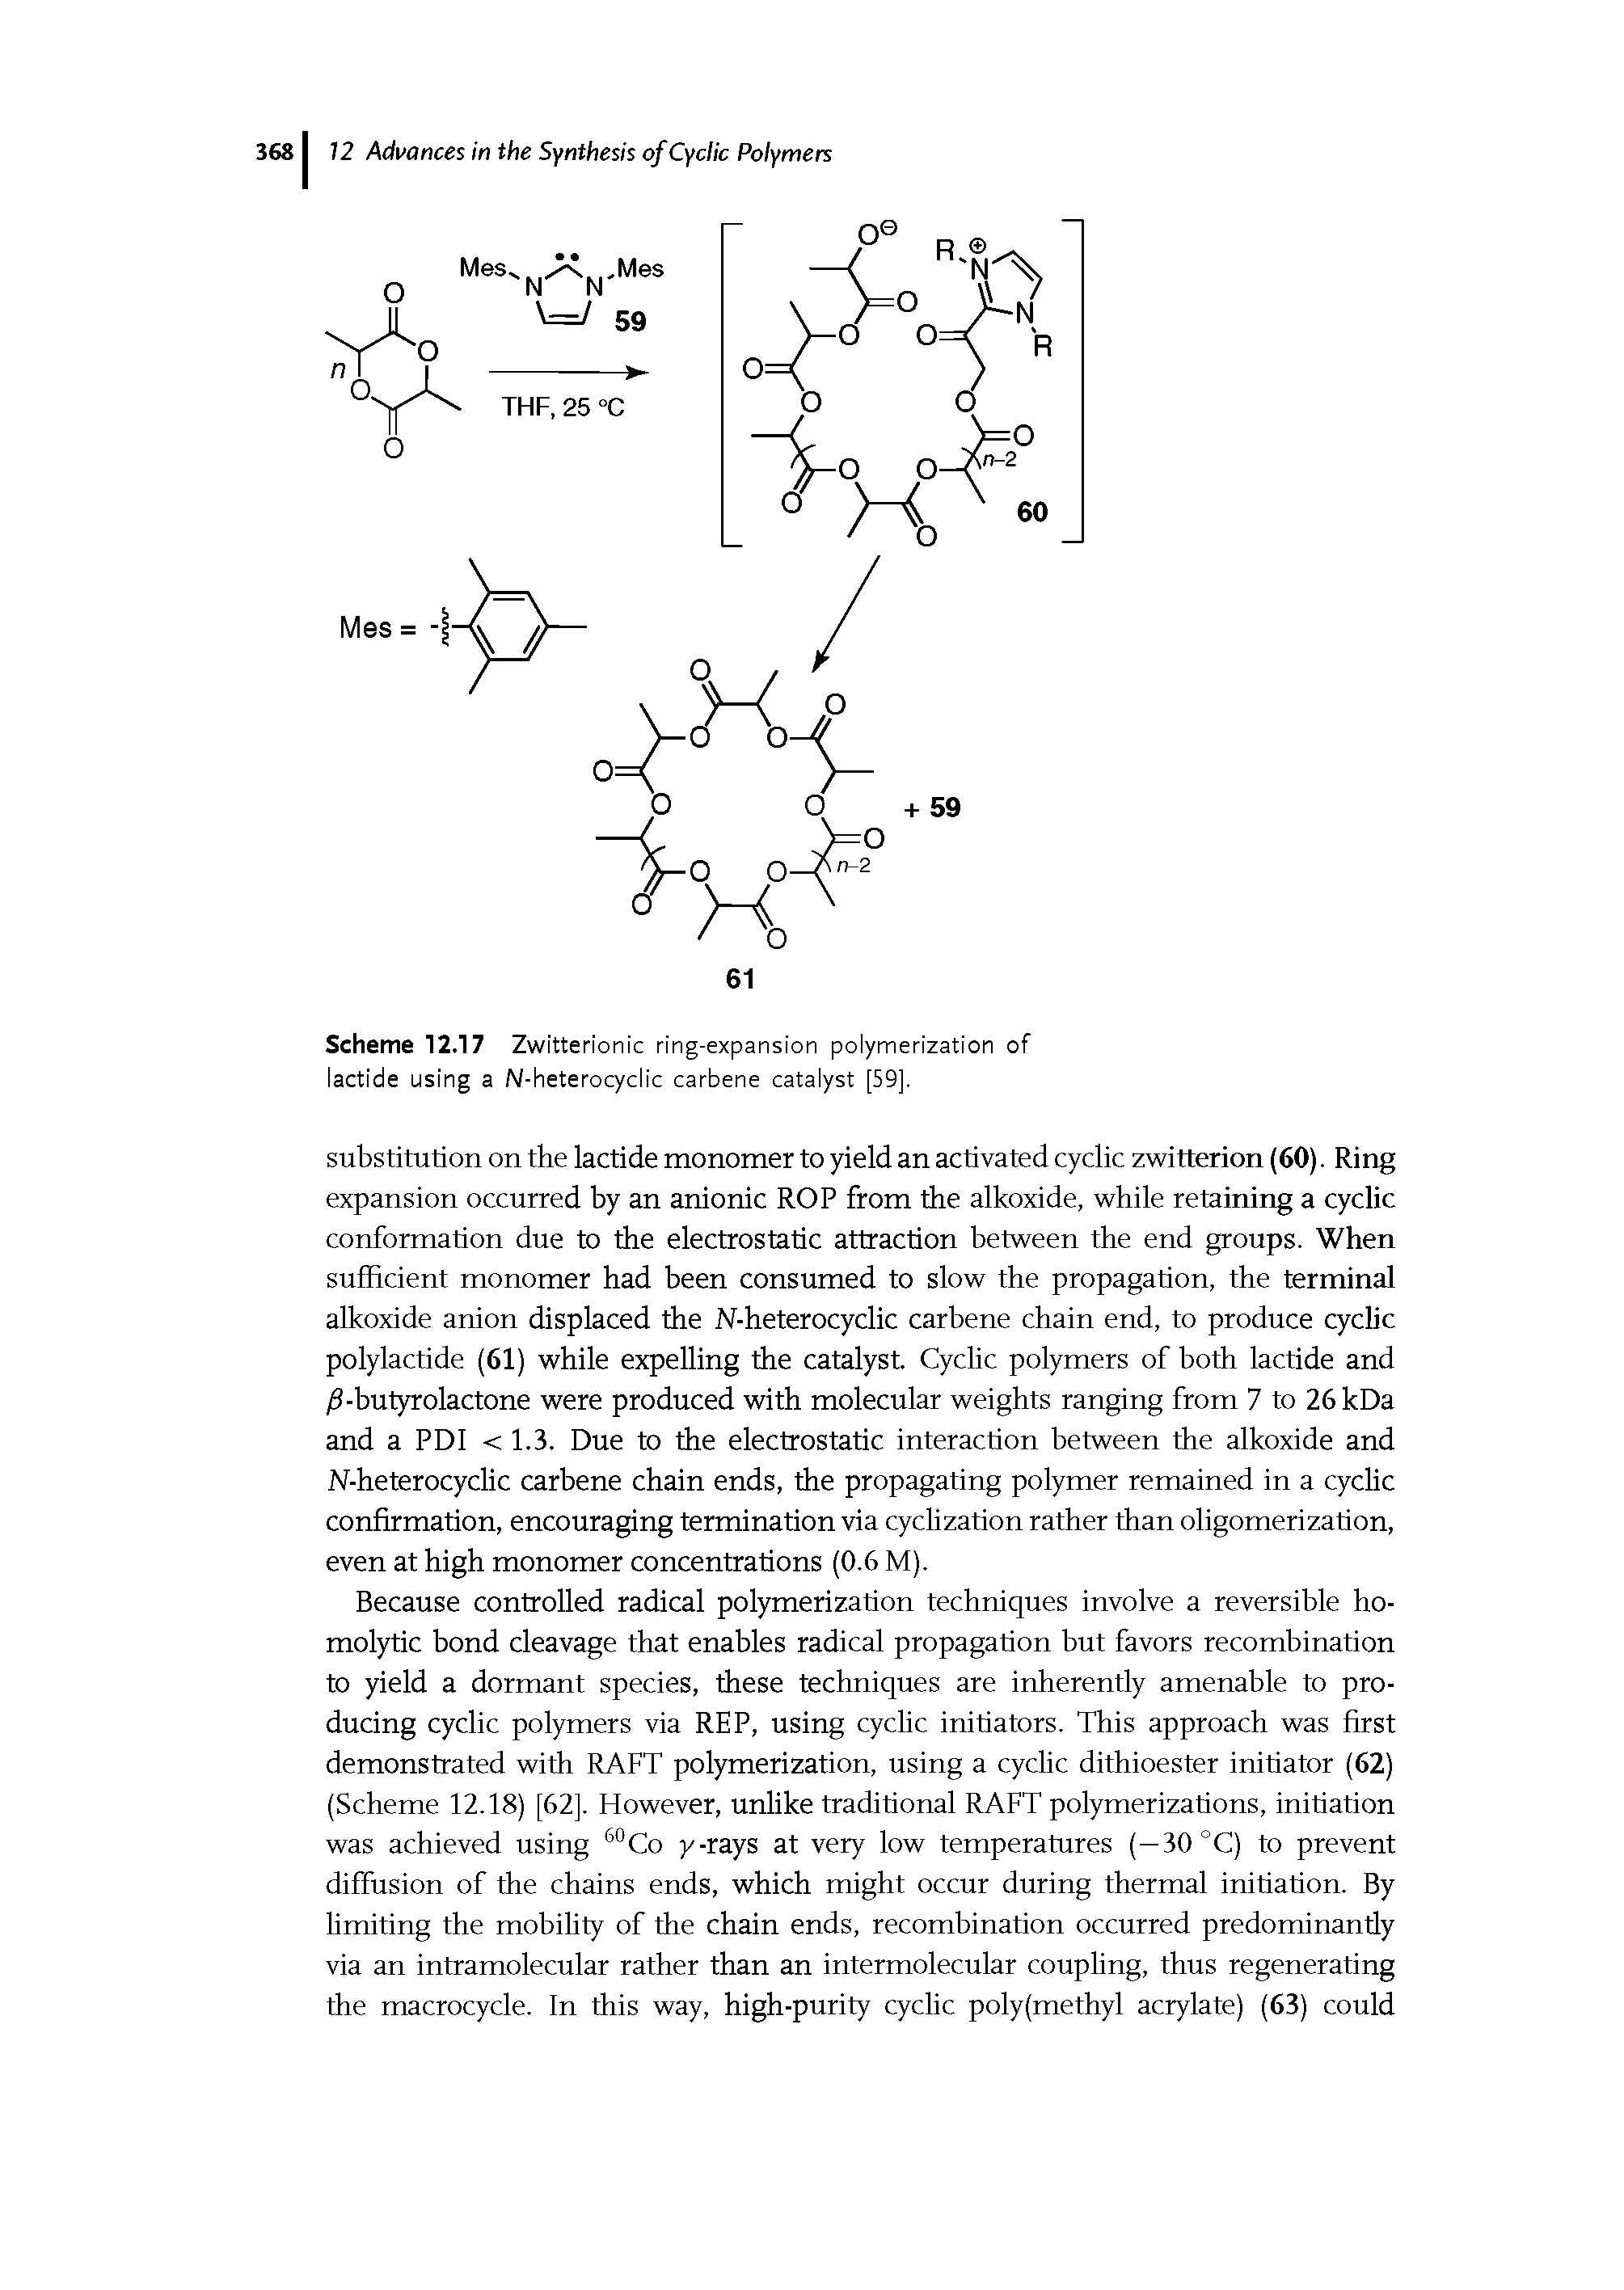 Scheme 12.17 Zwitterionic ring-expansion polymerization of lactide using a N-heteraqrolic carbene catalyst [59].